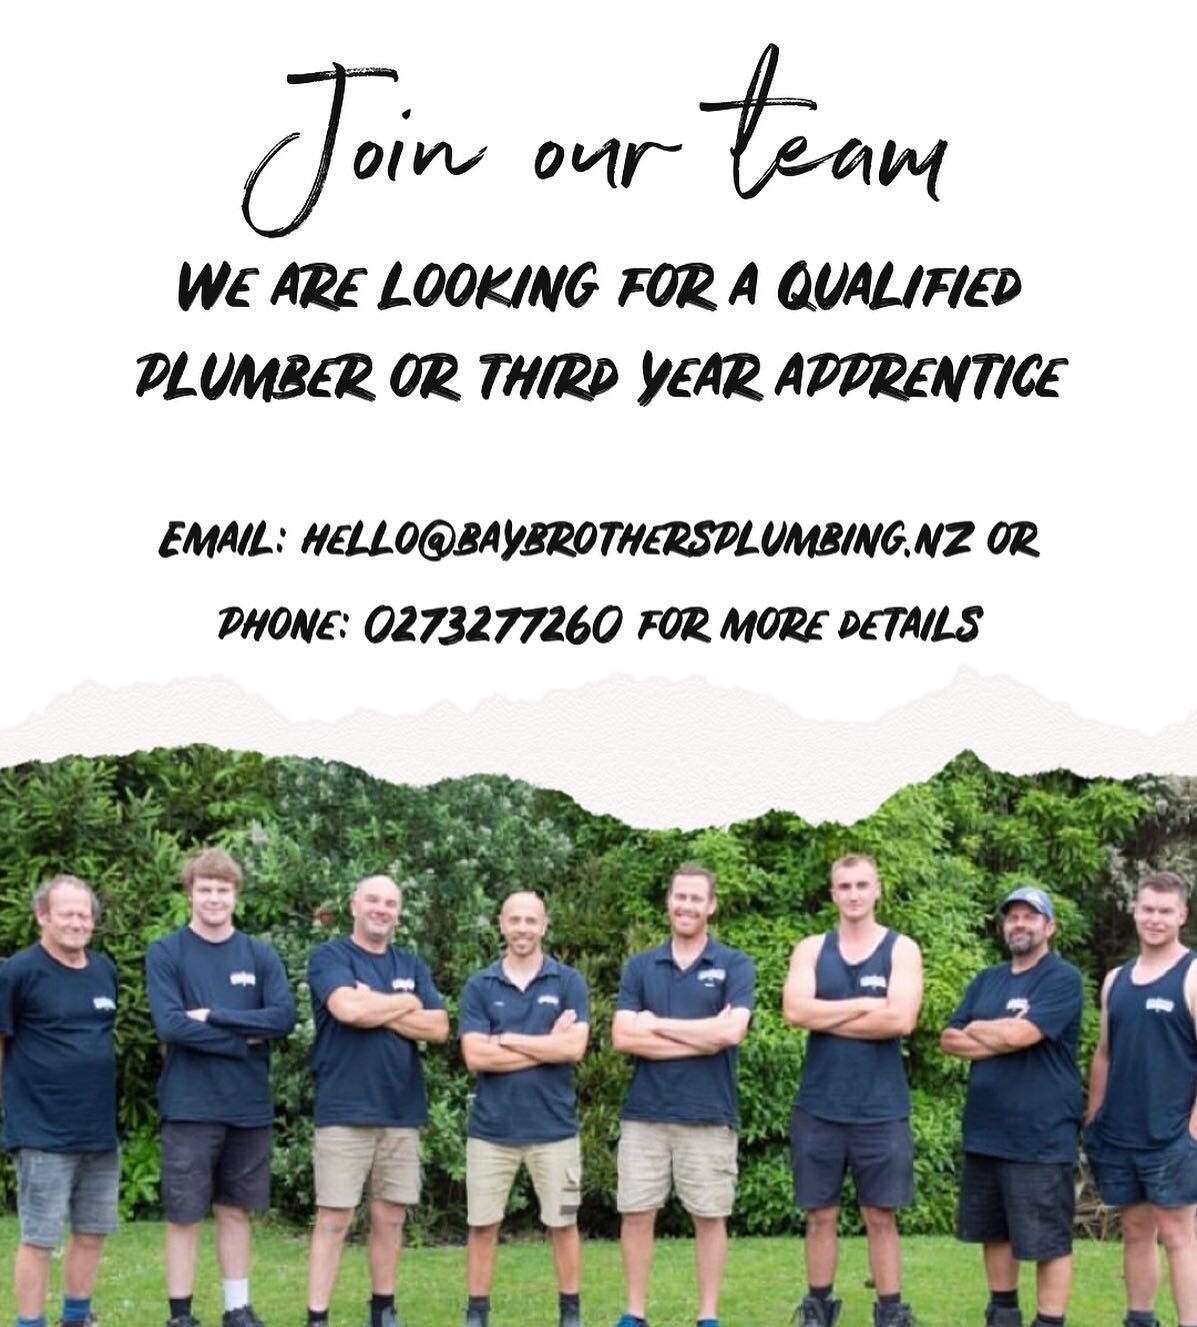 Due to busy workload we are after an experienced apprentice or tradesman plumber to join our team. Interested? Give Mark a ring on 027 327 7260 or email: hello@baybrothersplumbing.nz